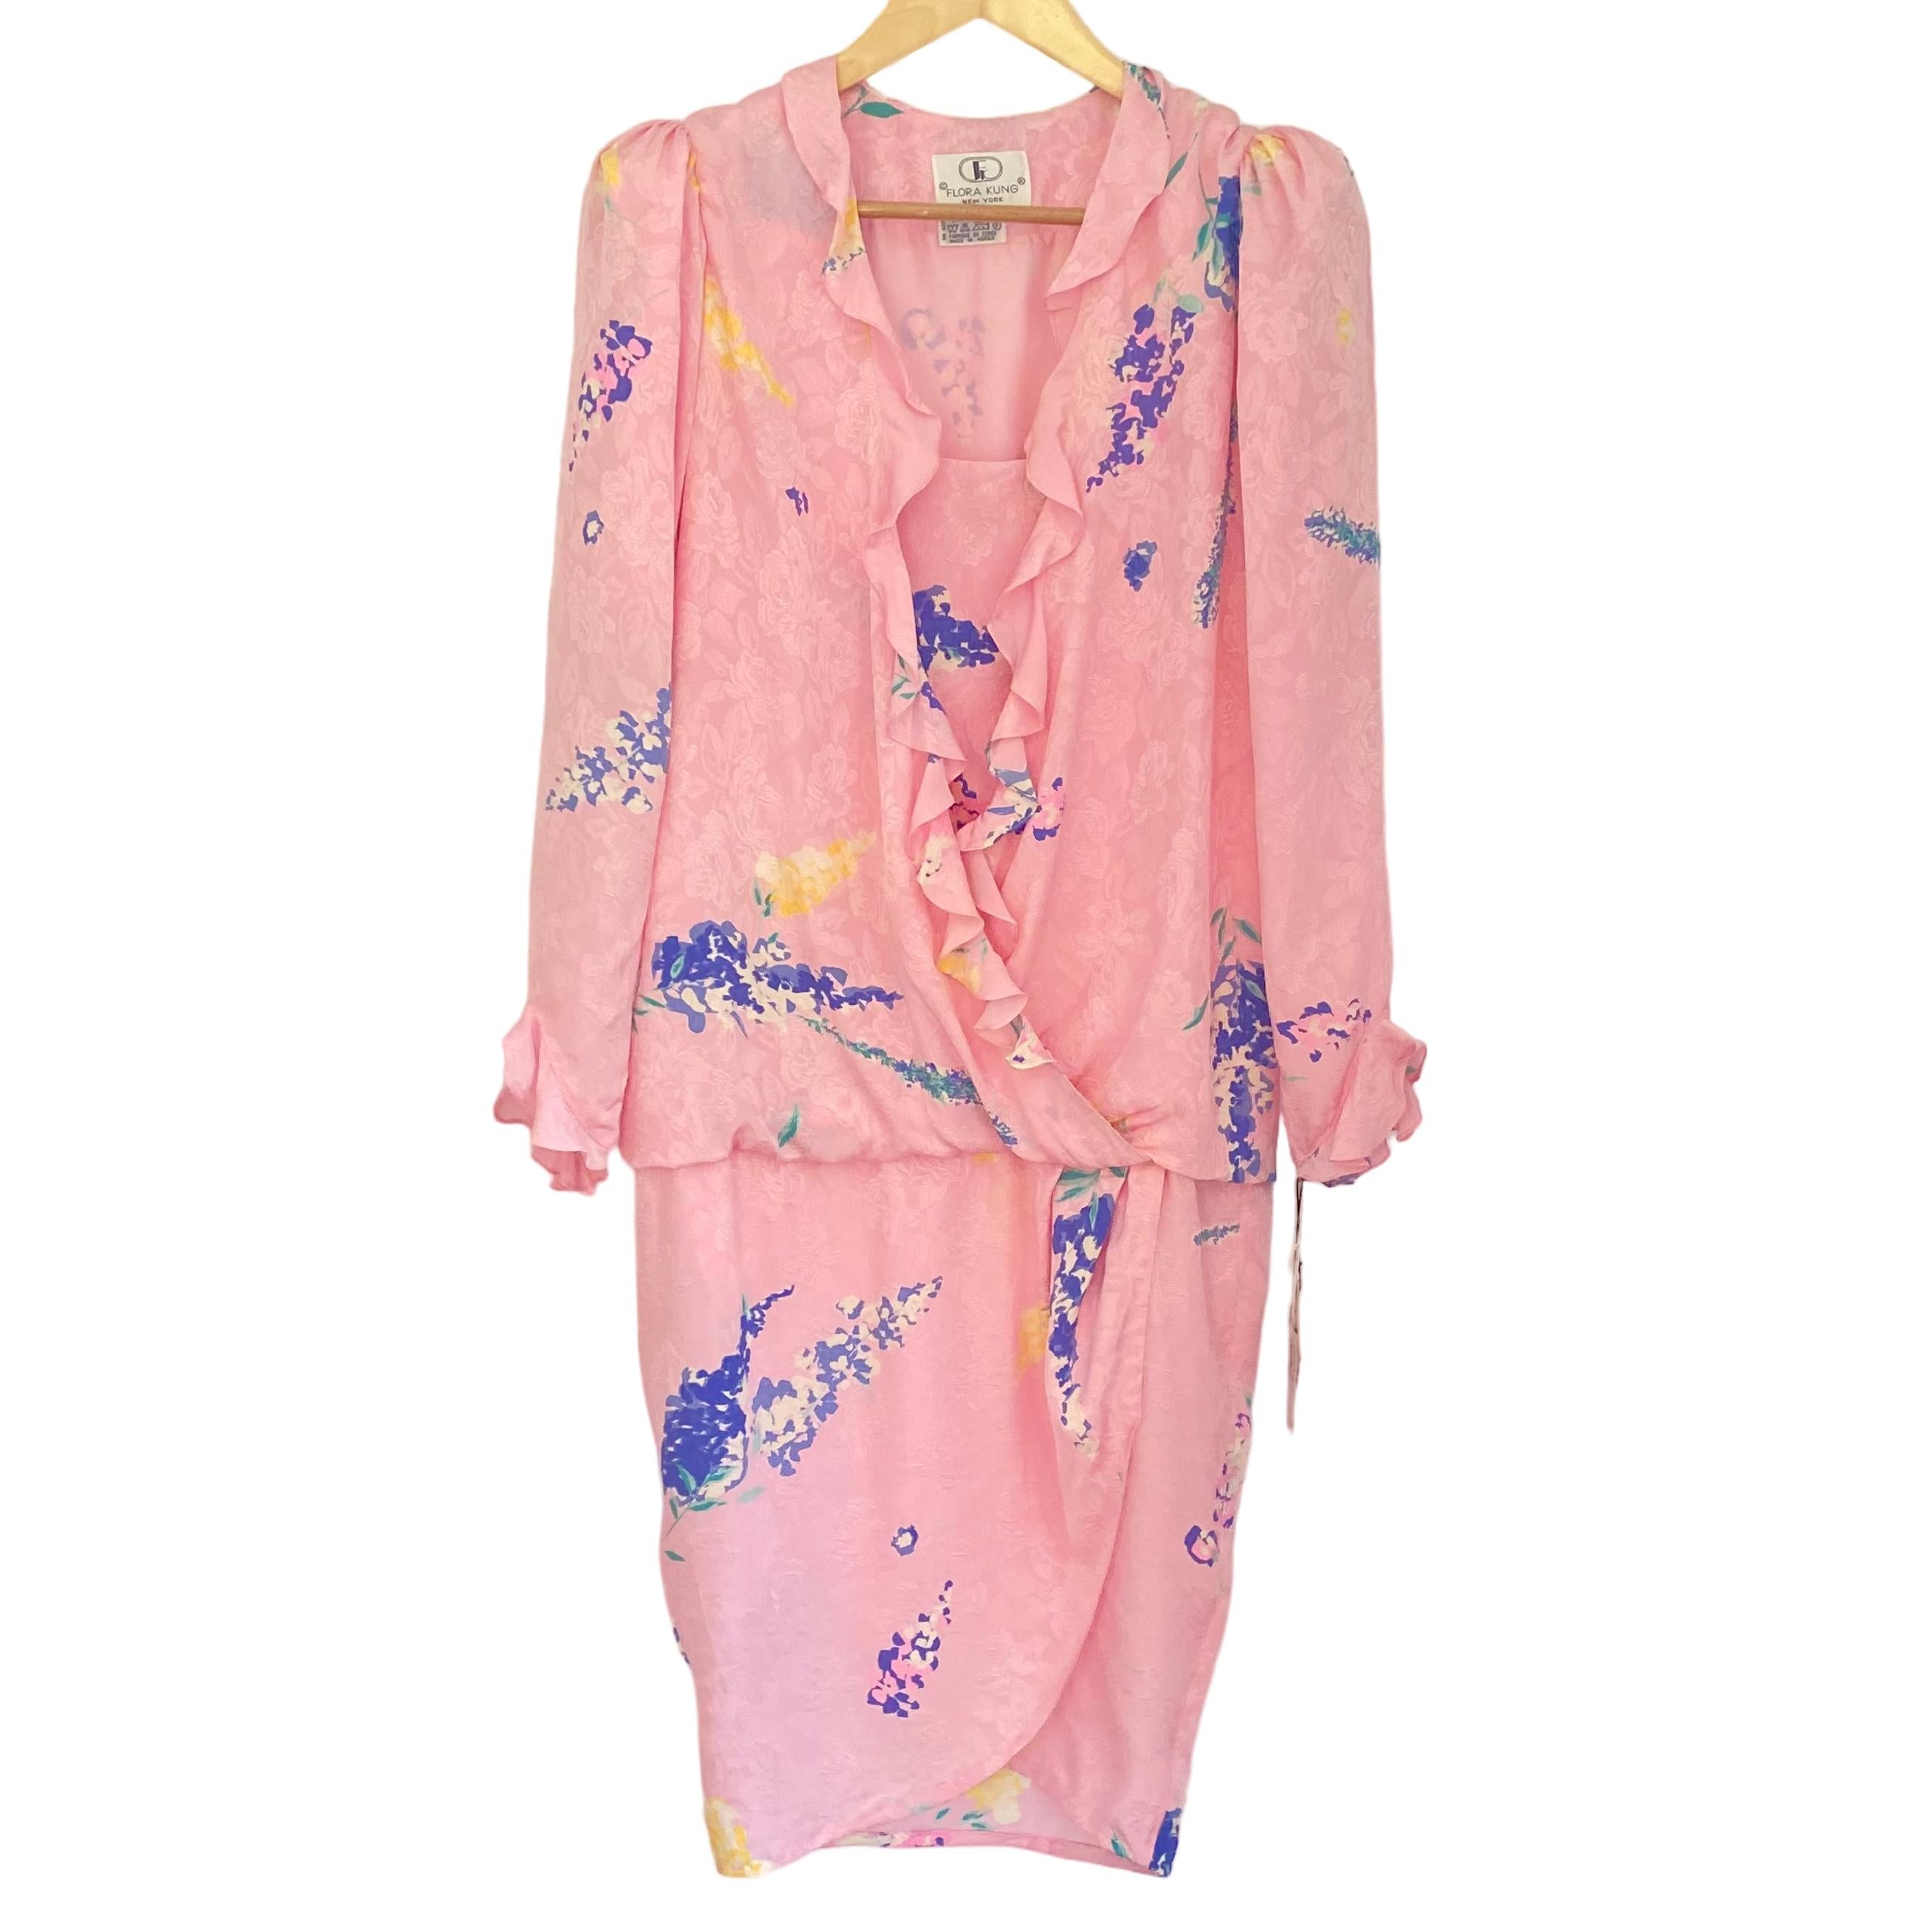 One-piece dress with tulip skirt. Silk-lined bodice for a blouson effect.
Puff sleeve. Easy to wear and flattering.
Yellow and purple lupines flowers on pink, printed on Flora's original floral brocade jacquard weaved in Korea from the finest